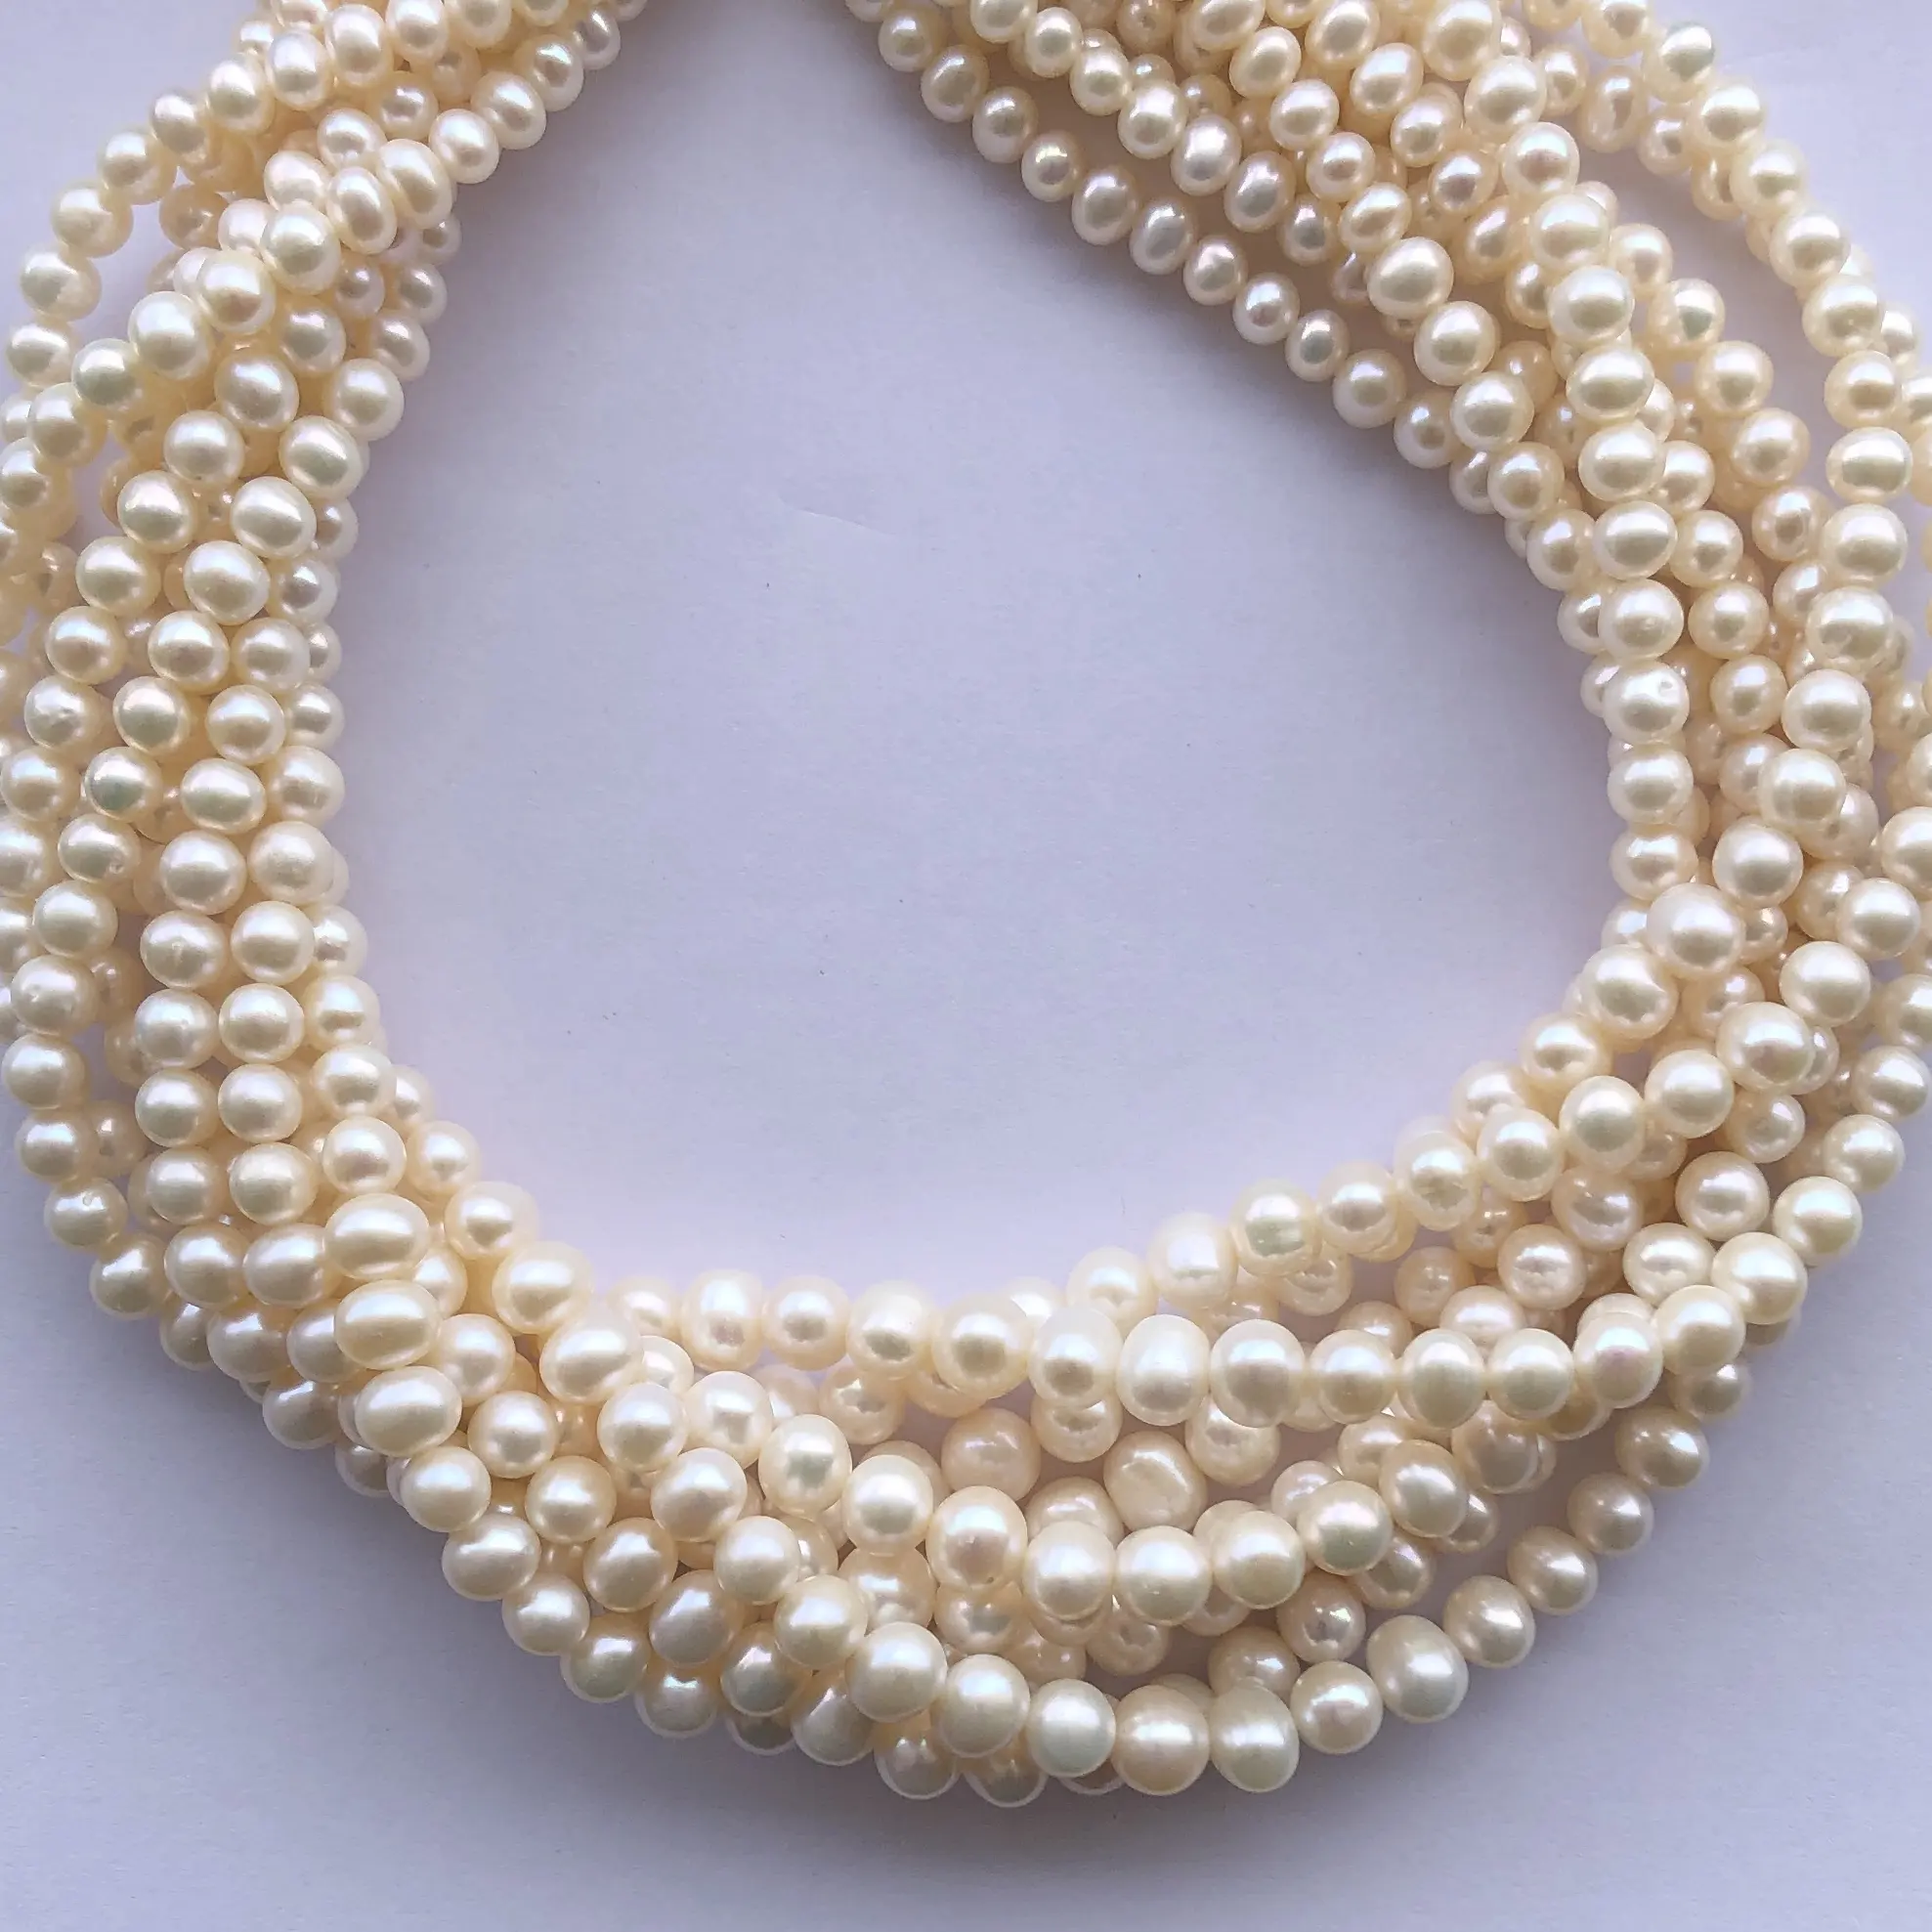 6mm 8mm Natural Yellow White Color Freshwater Pearl Stone Potato Shape Beads Wholesale Jewelry Making Cultured Pearls Alibaba